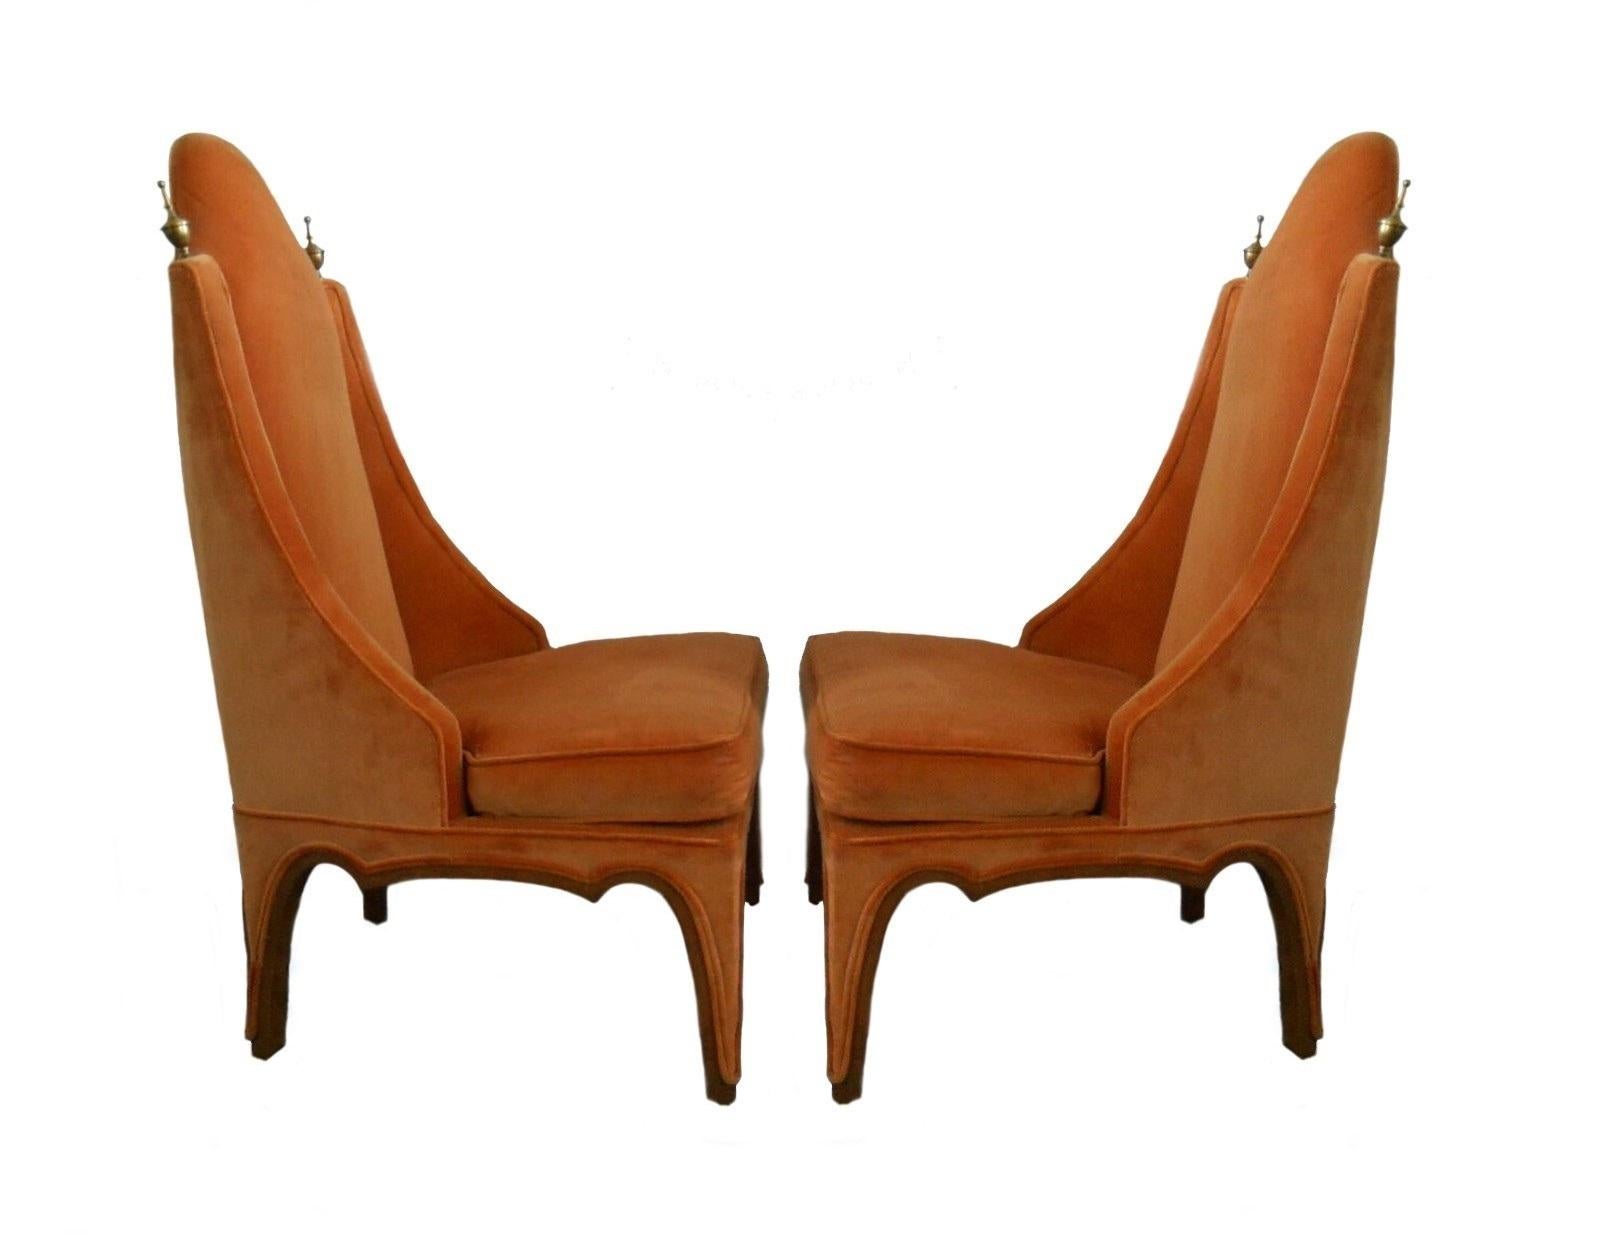 Unusually designed side or slipper chairs, American, 1960s. Newly upholstered in an orange velvet with the legs trimmed in walnut wood and accented by tall brass finials on top of each side of the chair back.